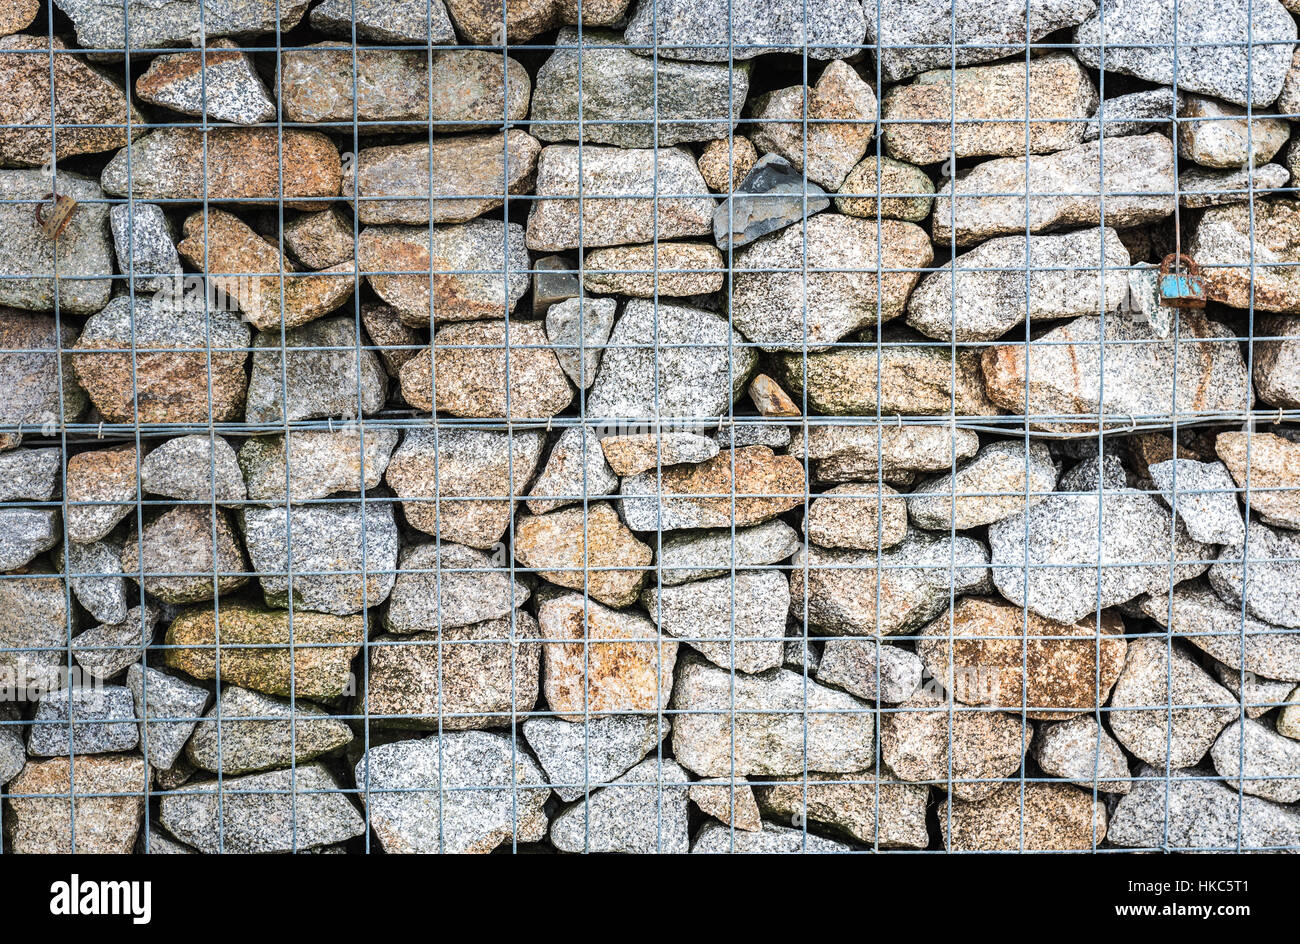 Gabion Baskets High Resolution Stock Photography and Images - Alamy